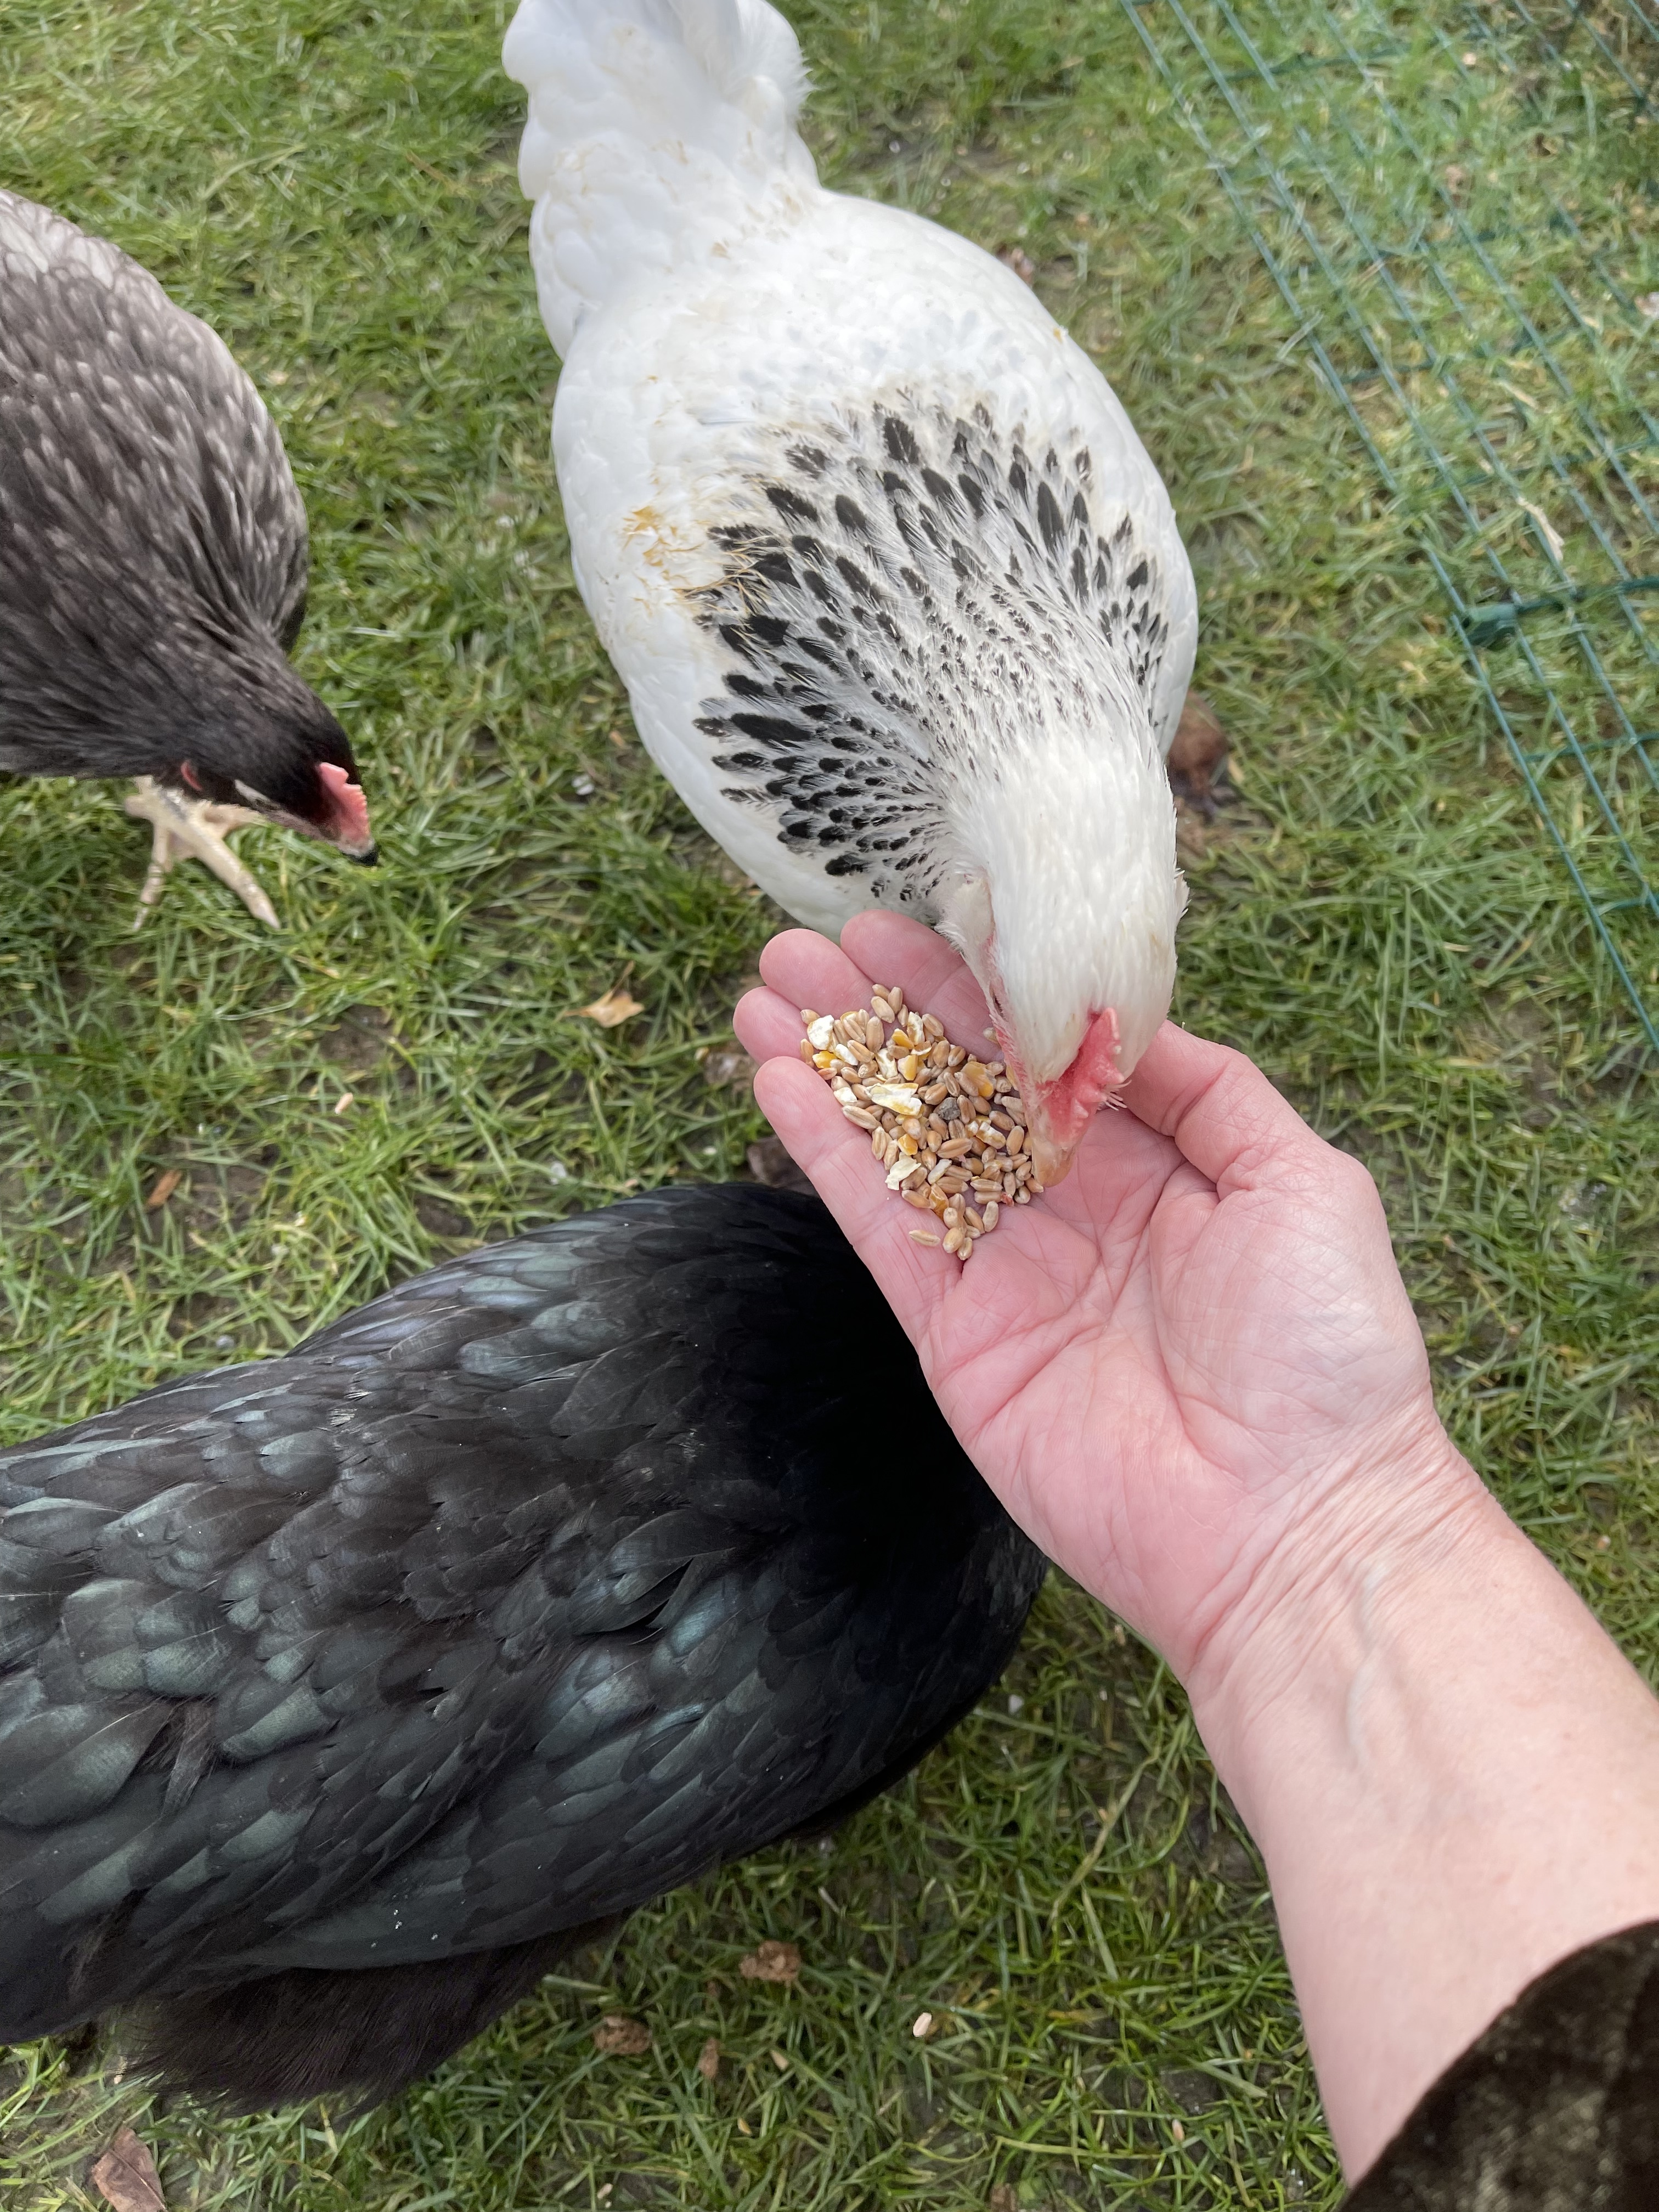 A chicken pecking some seeds from a hand